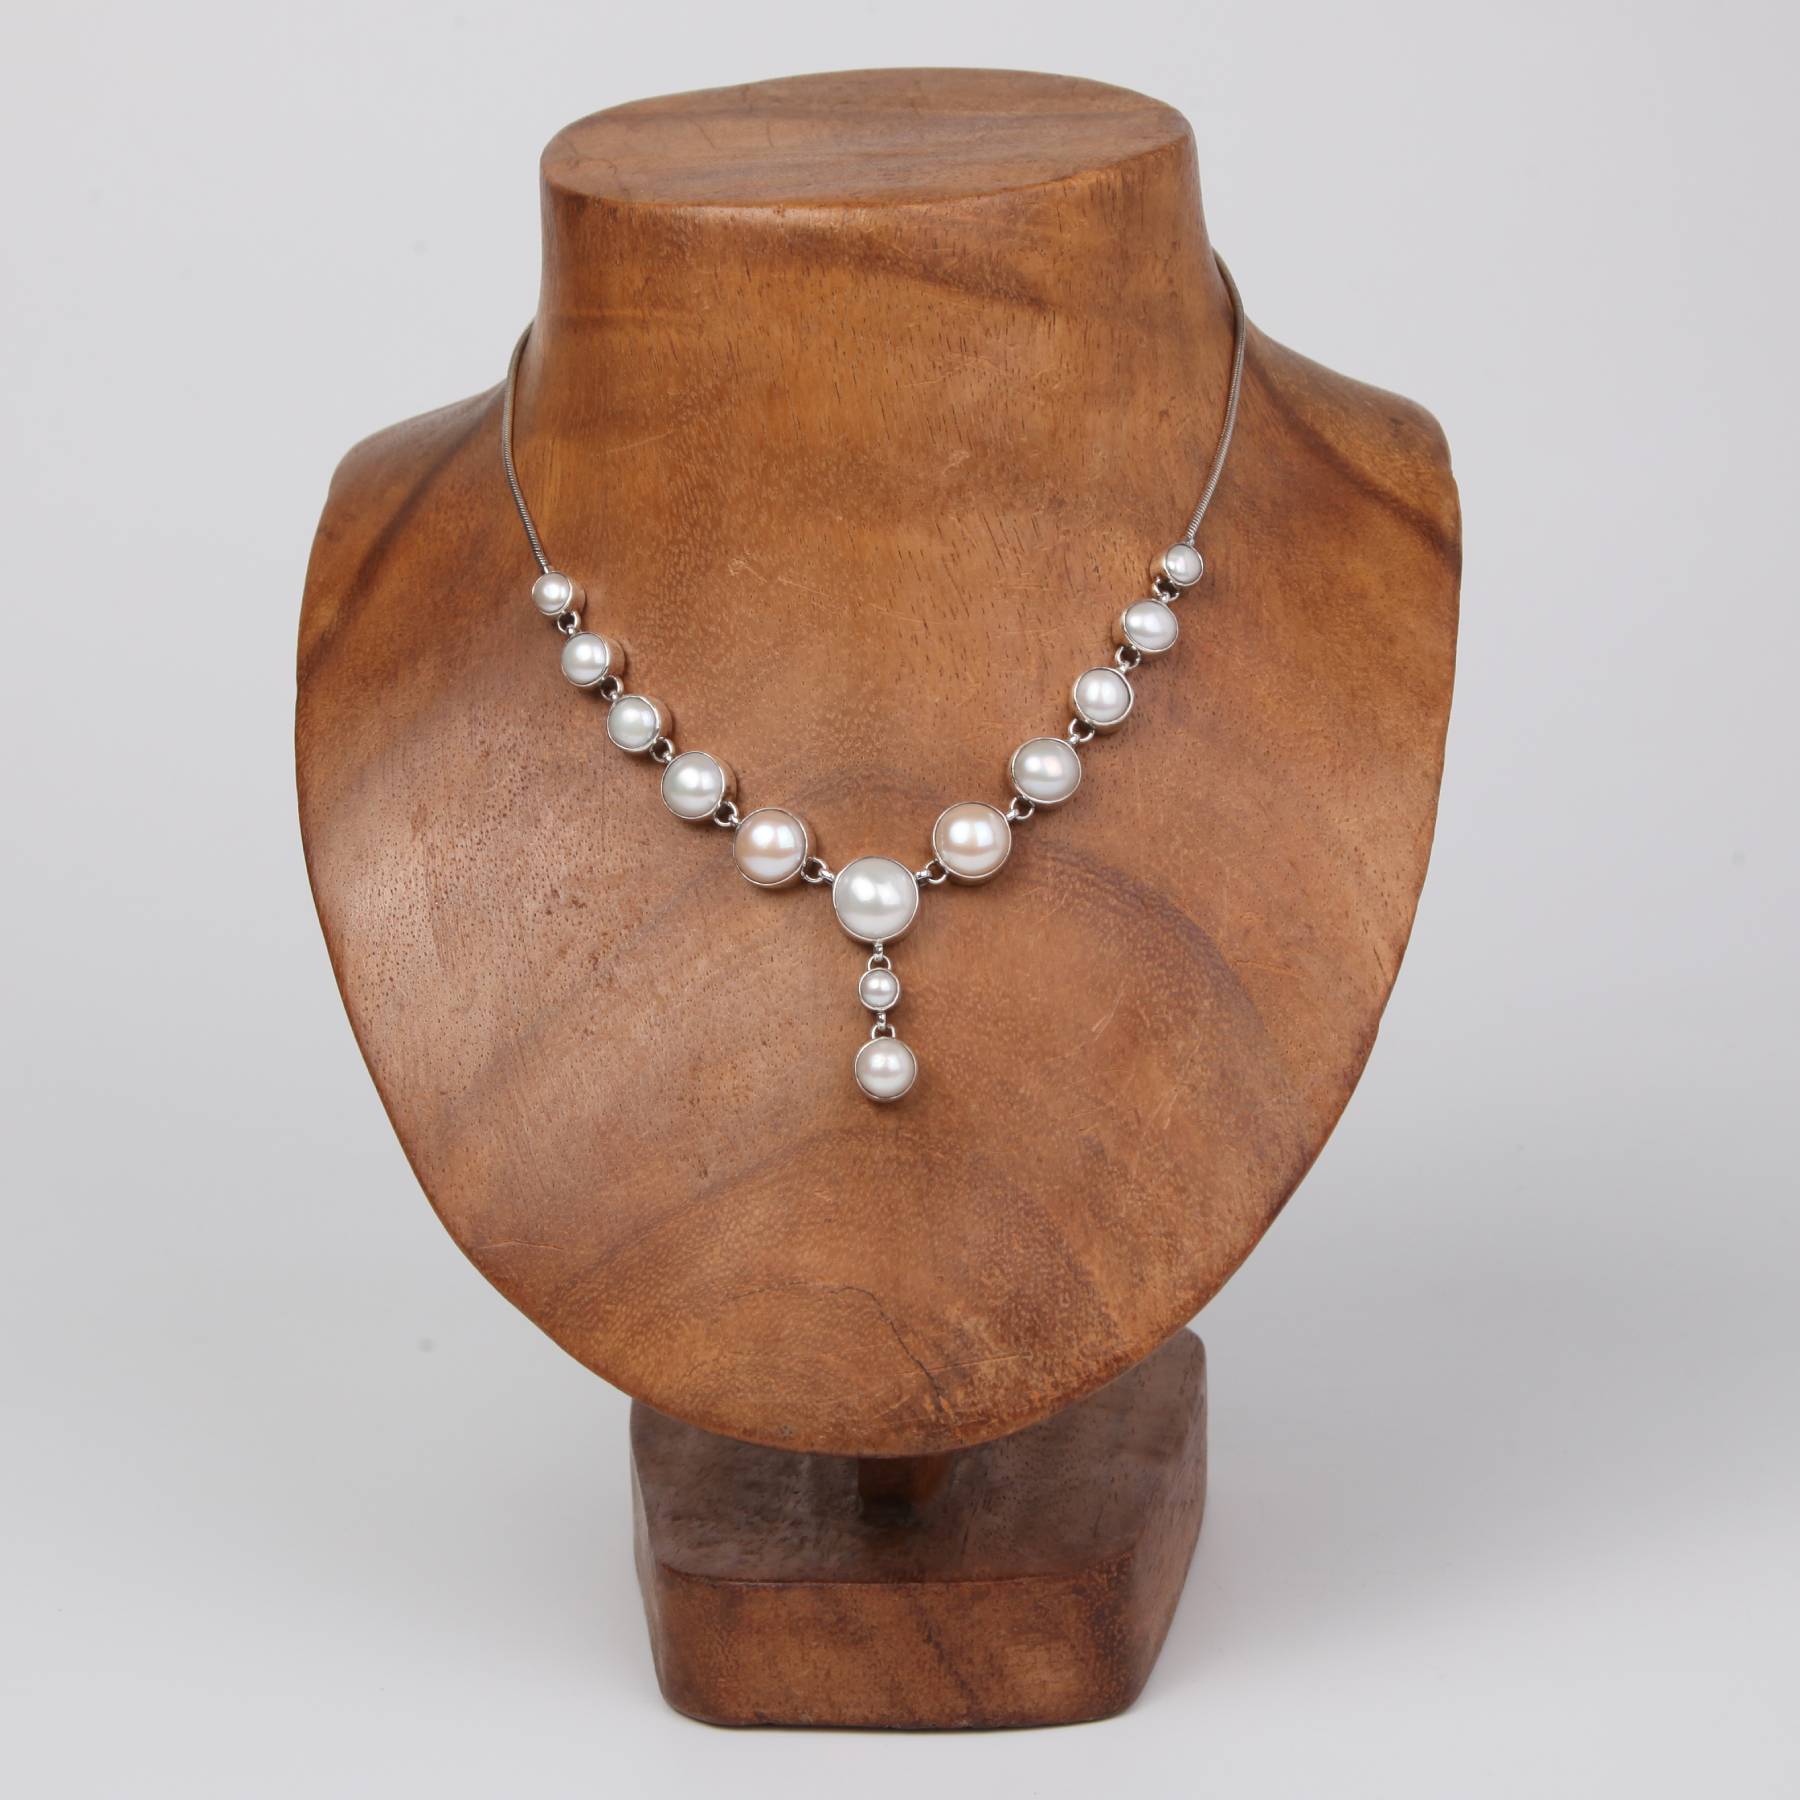 Light Drop Down Sterling silver Necklace with Fresh Water Pearls